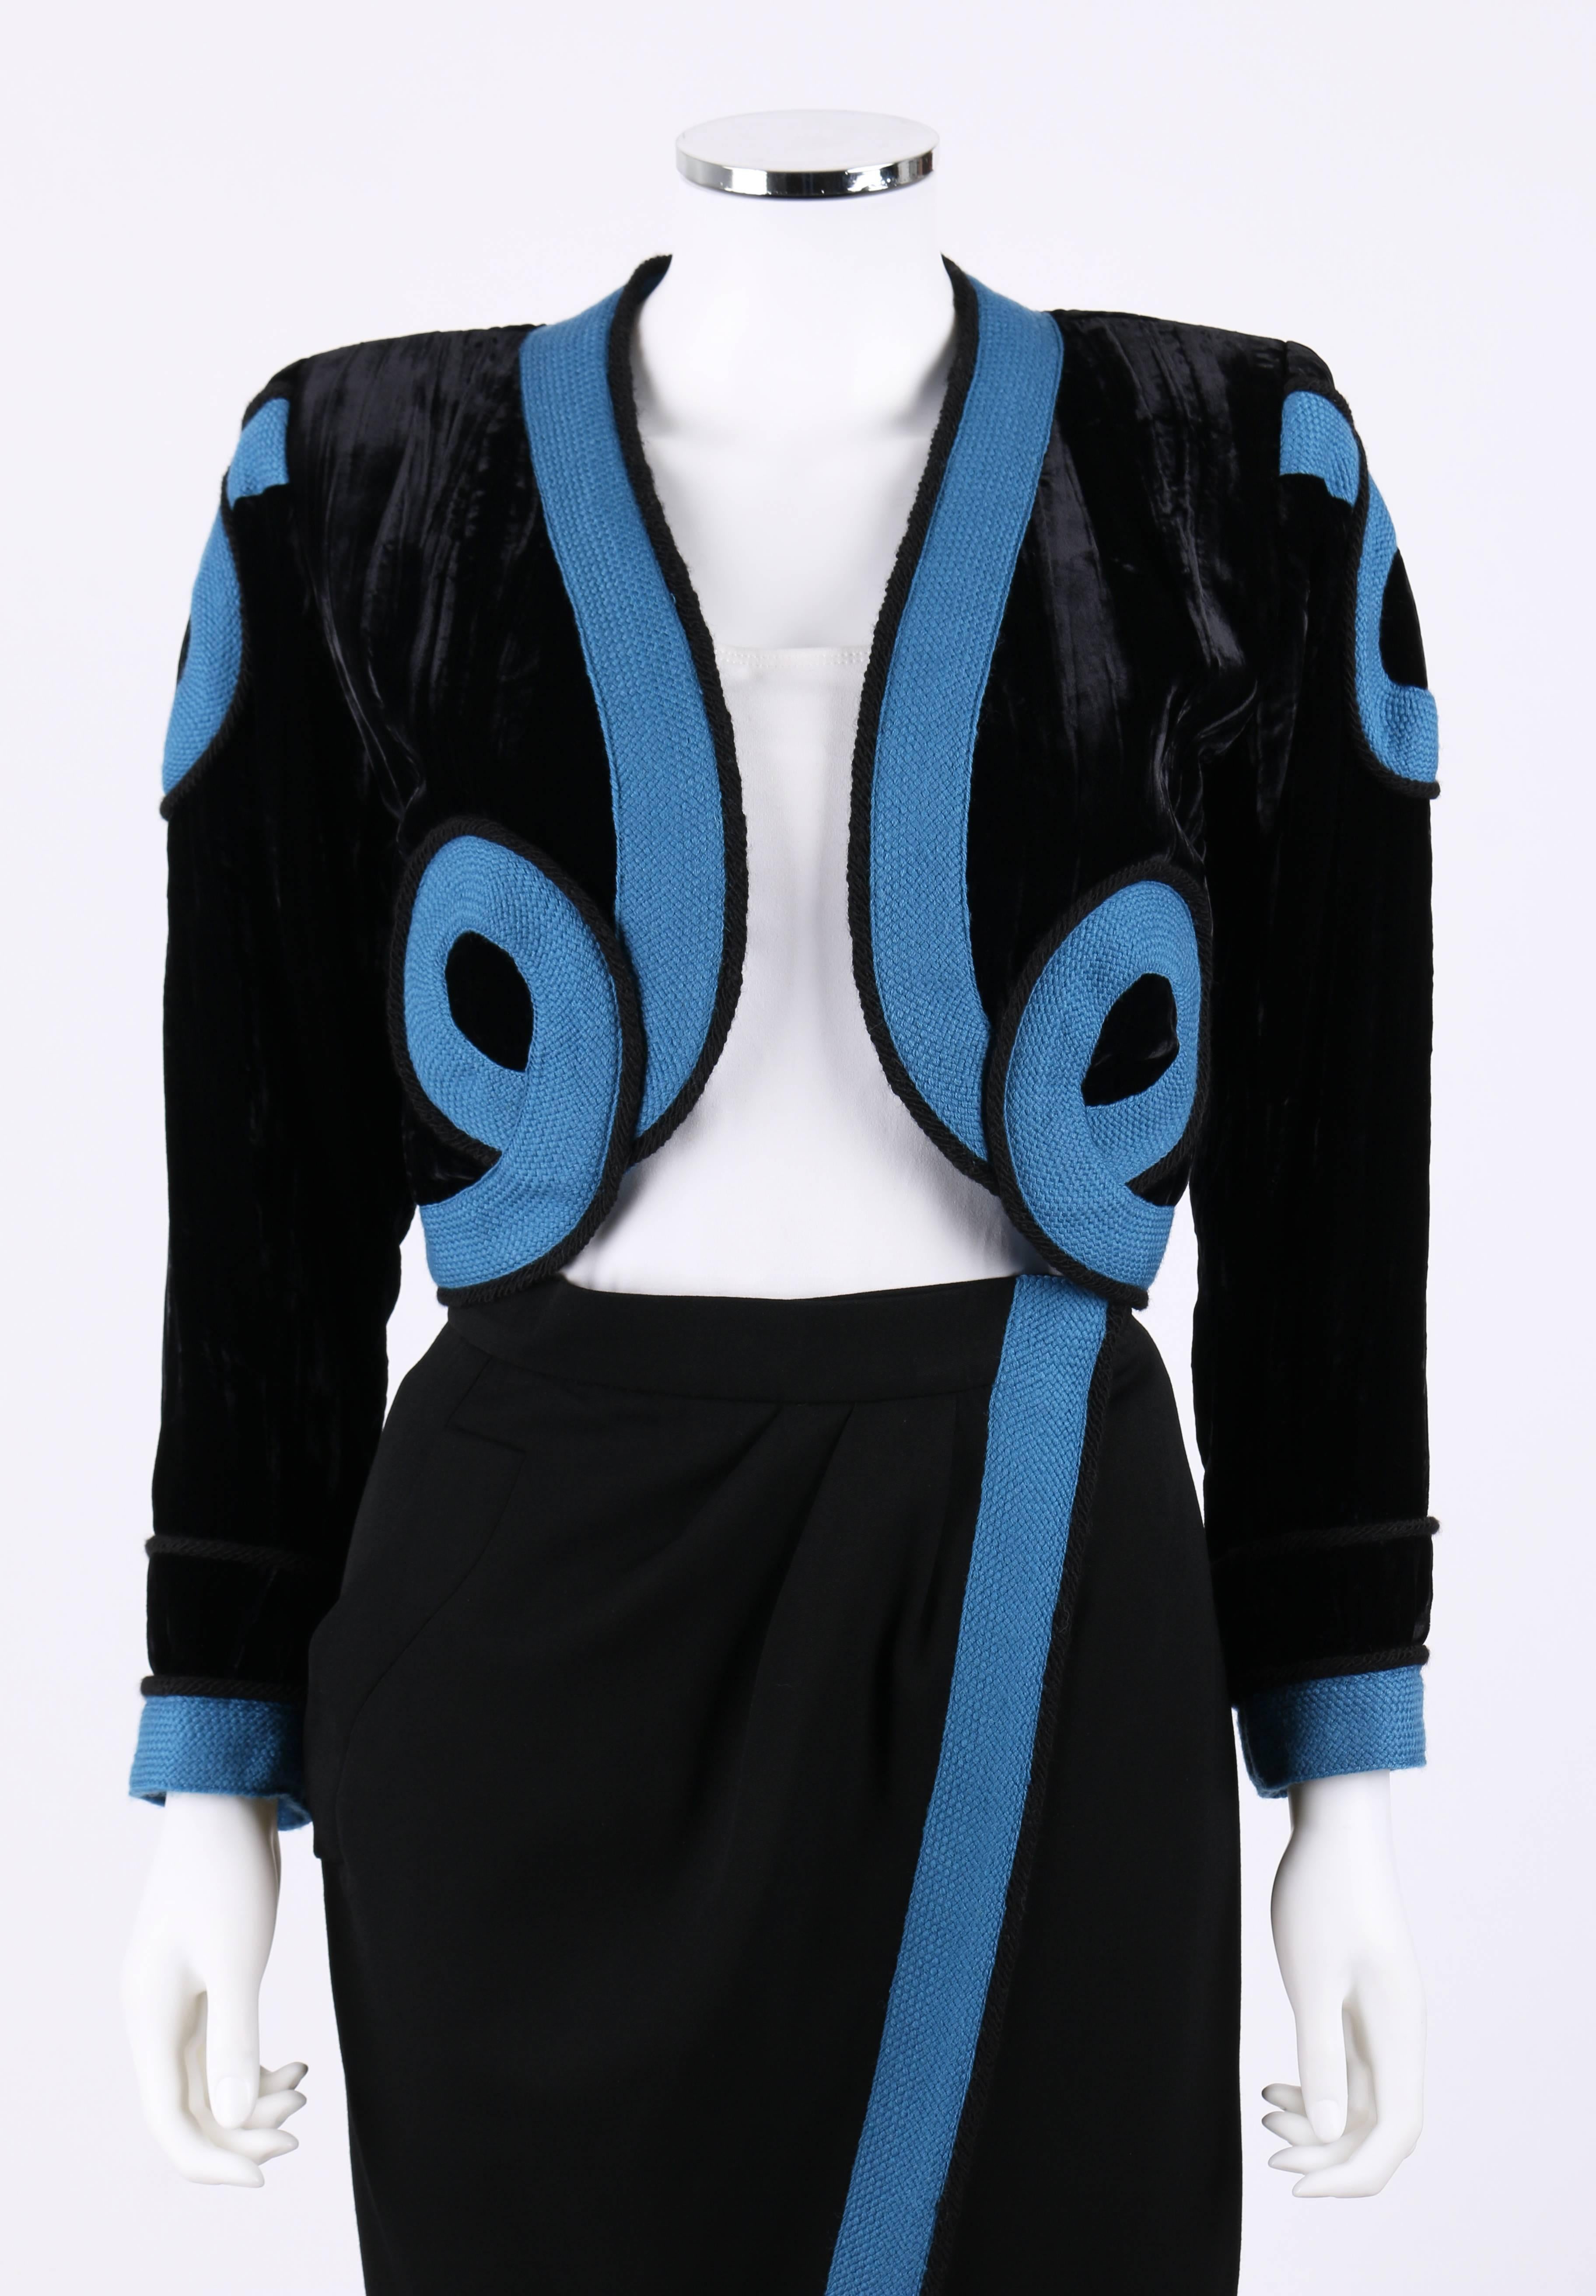 Vintage S/S 1990 Yves Saint Laurent Toreador-style two piece black 100% wool skirt and silk velvet blazer set. Long sleeve. Open front. Blue and black woven rope embellishments on blazer center front, shoulders, cuffs and center front of skirt.